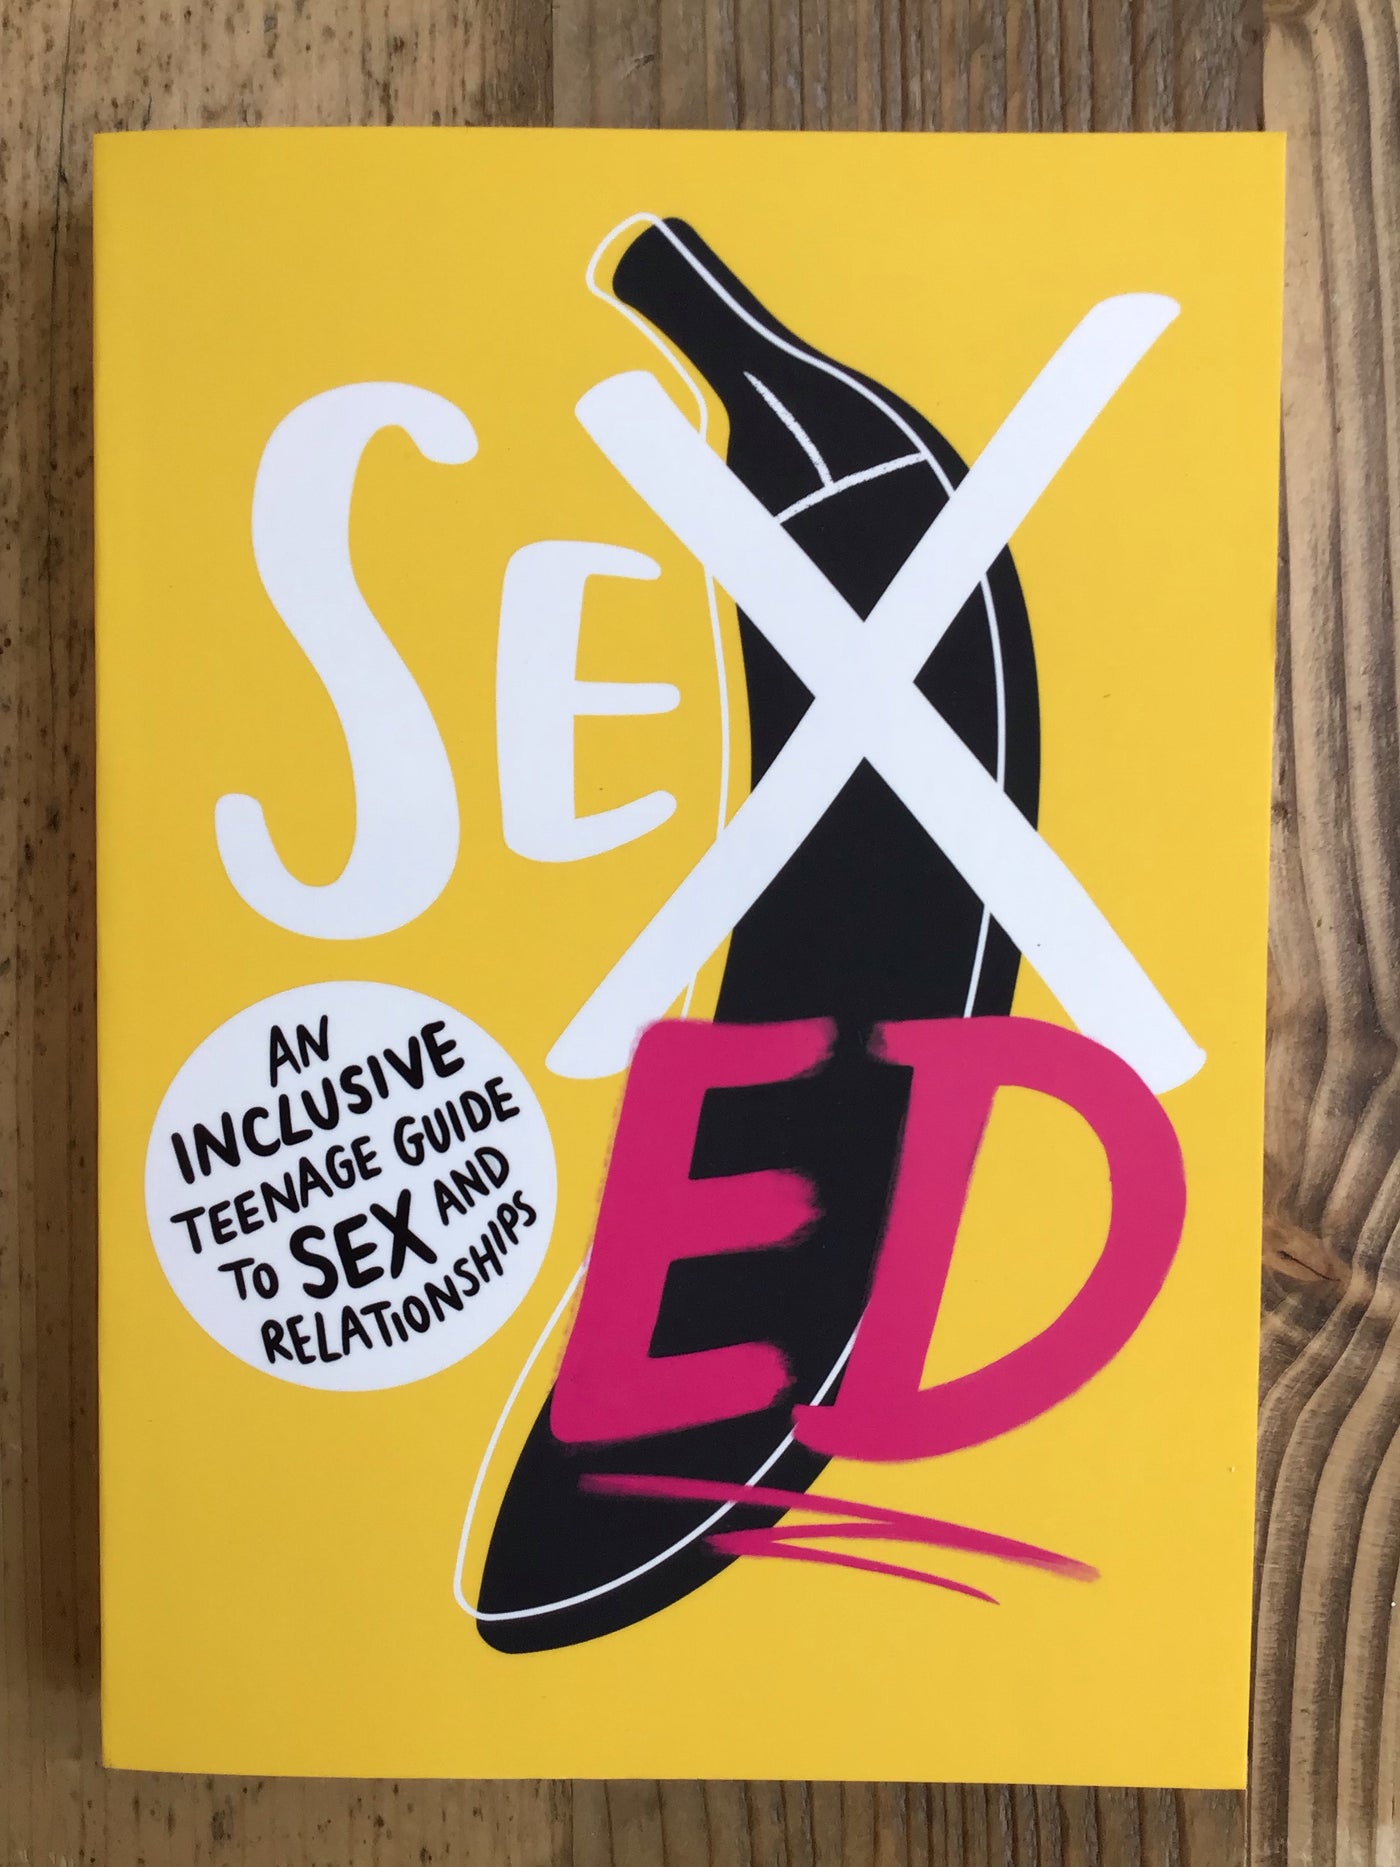 Sex Ed: An Inclusive Teenage Guide to Sex and Relationships